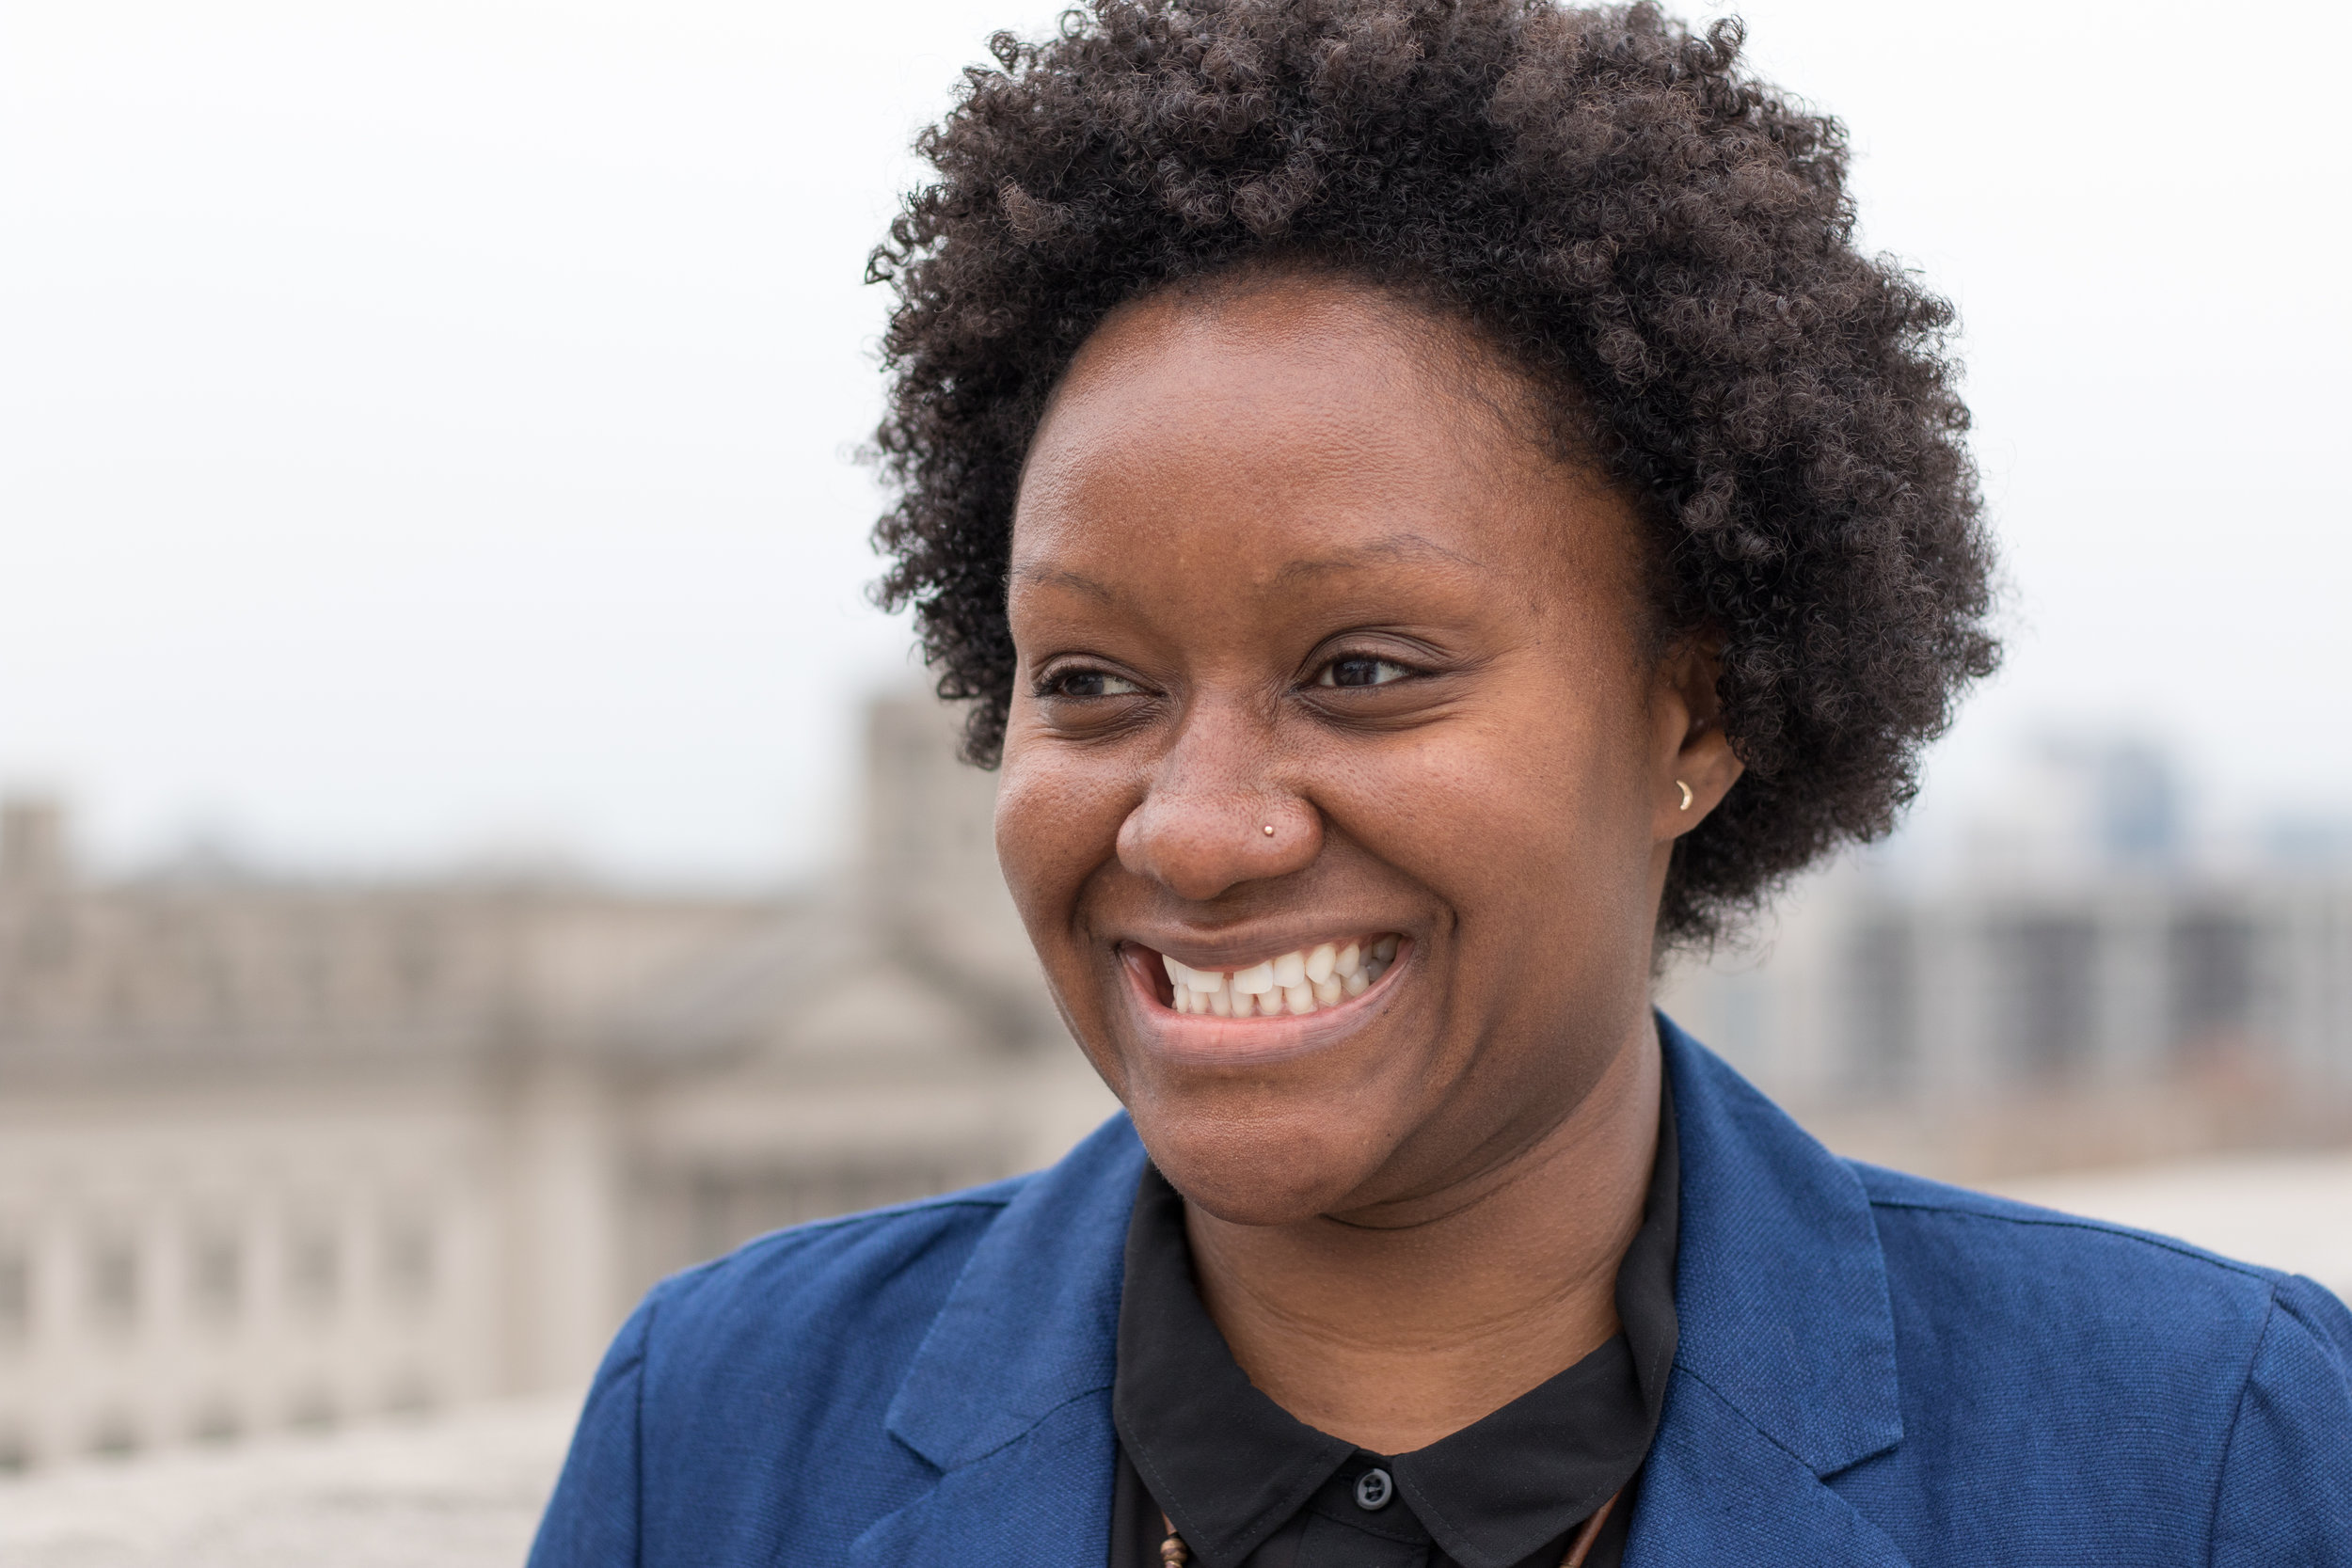 Alt text: a young black woman smiles a gap-toothed grin while looking off camera and wearing a blue blazer and black blouse. The background is blurry rooftops of buildings.